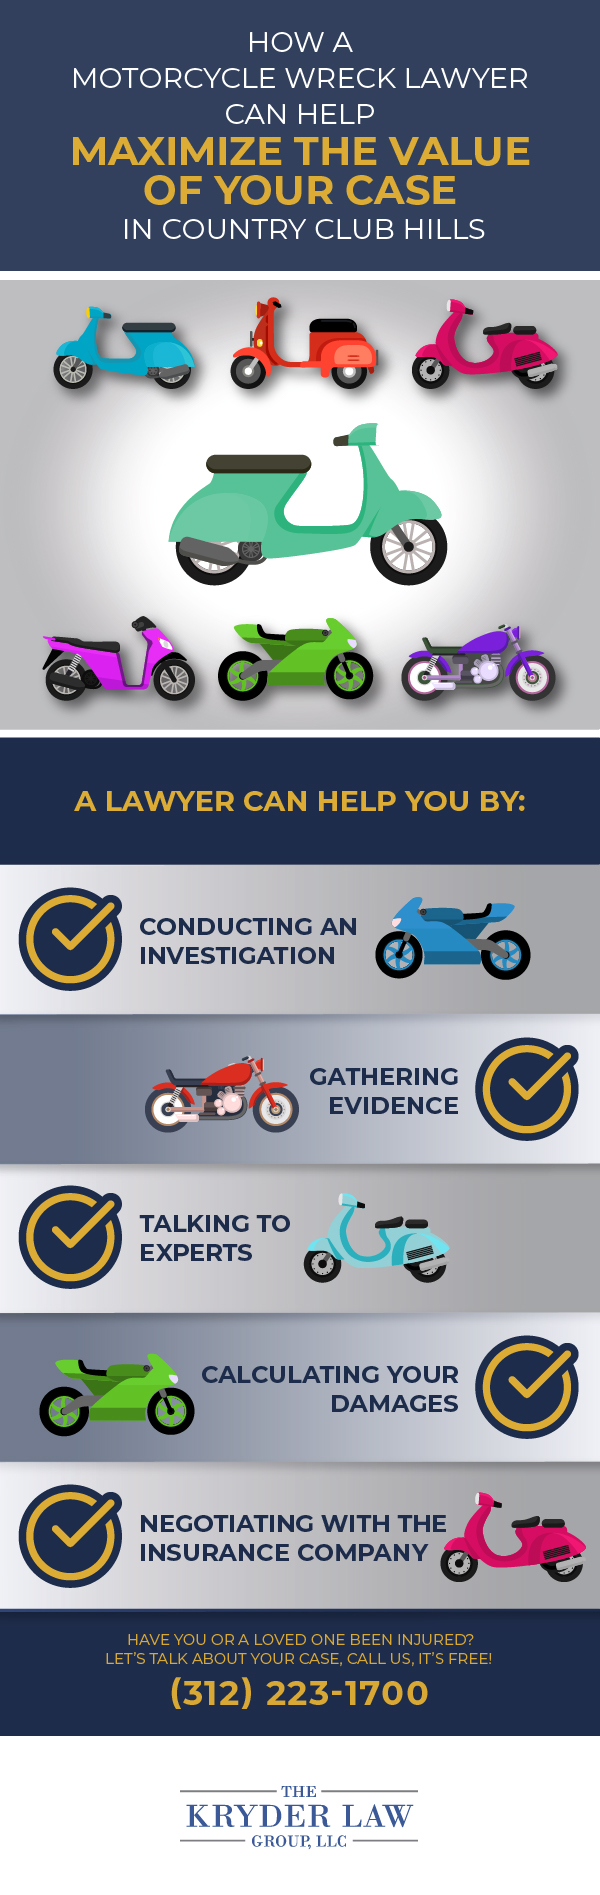 How a Motorcycle Wreck Lawyer Can Help Maximize the Value of Your Case in Country Club Hills